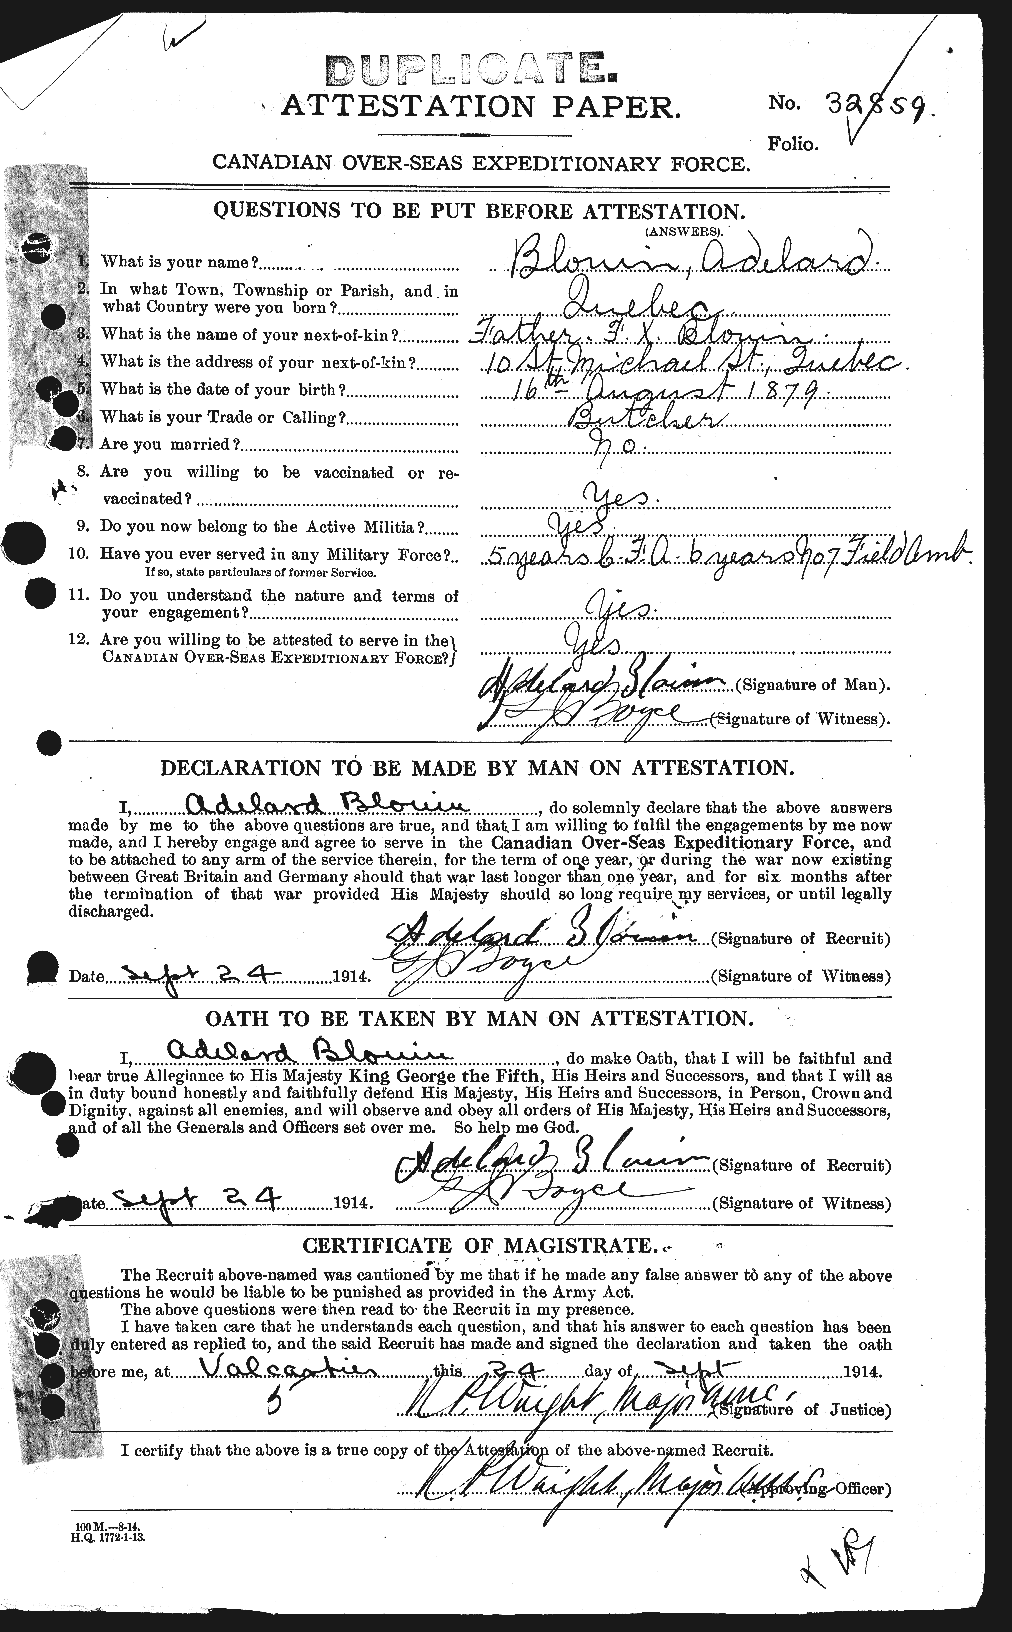 Personnel Records of the First World War - CEF 247376a